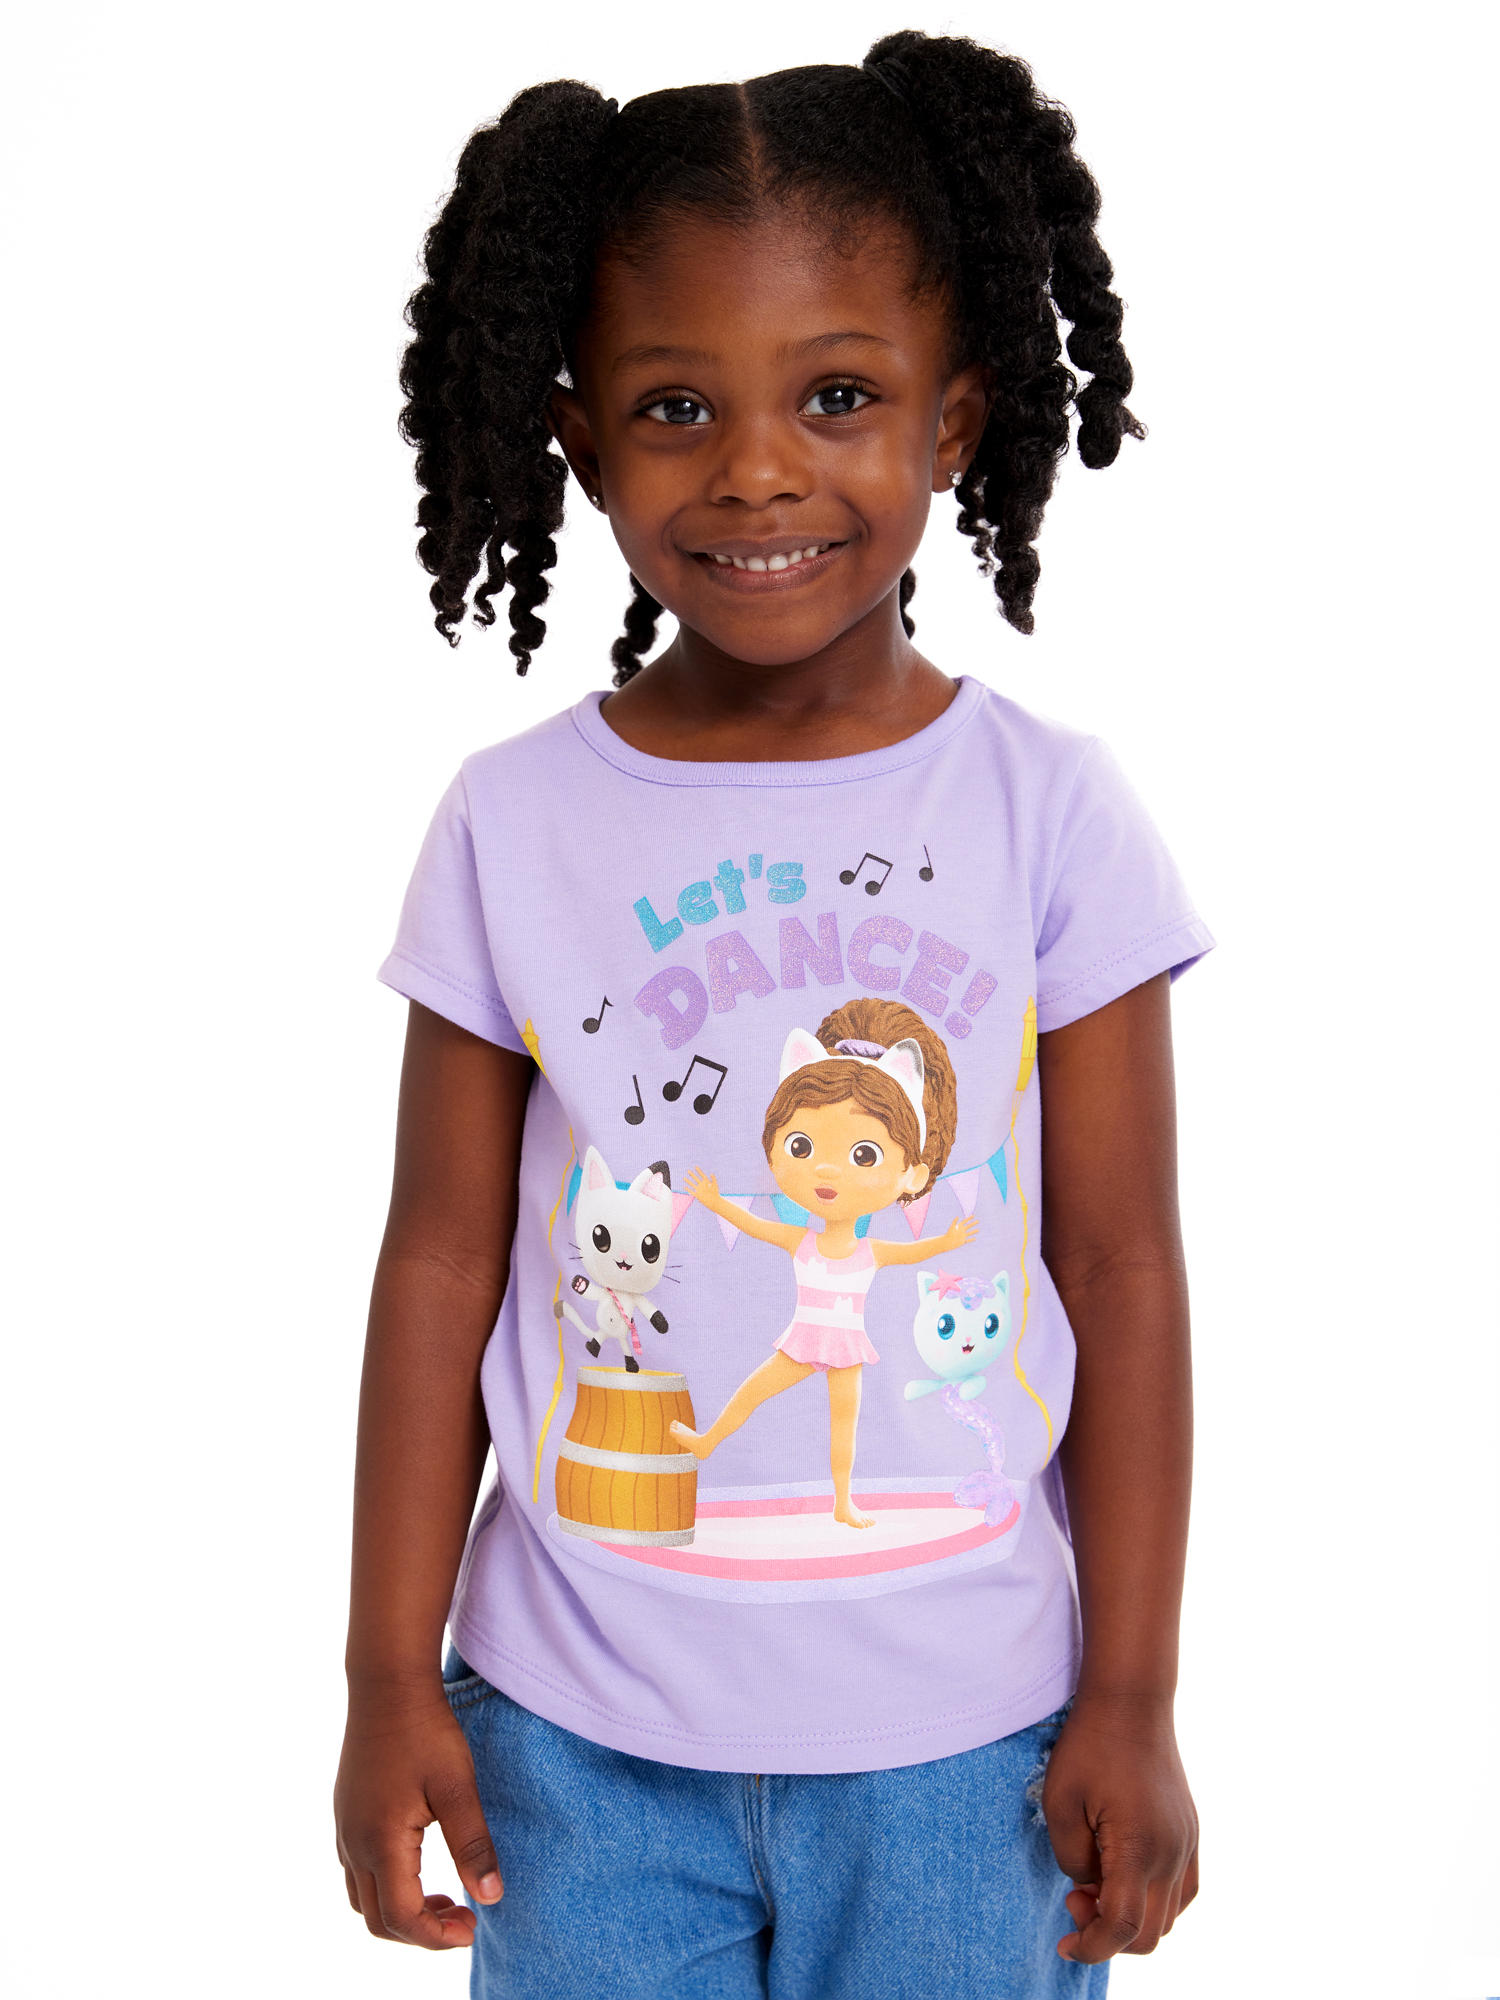 Gabby's Dollhouse Toddler Girl Graphic Print Fashion T-Shirts, 4-Pack, Sizes 2T-5T - image 2 of 9